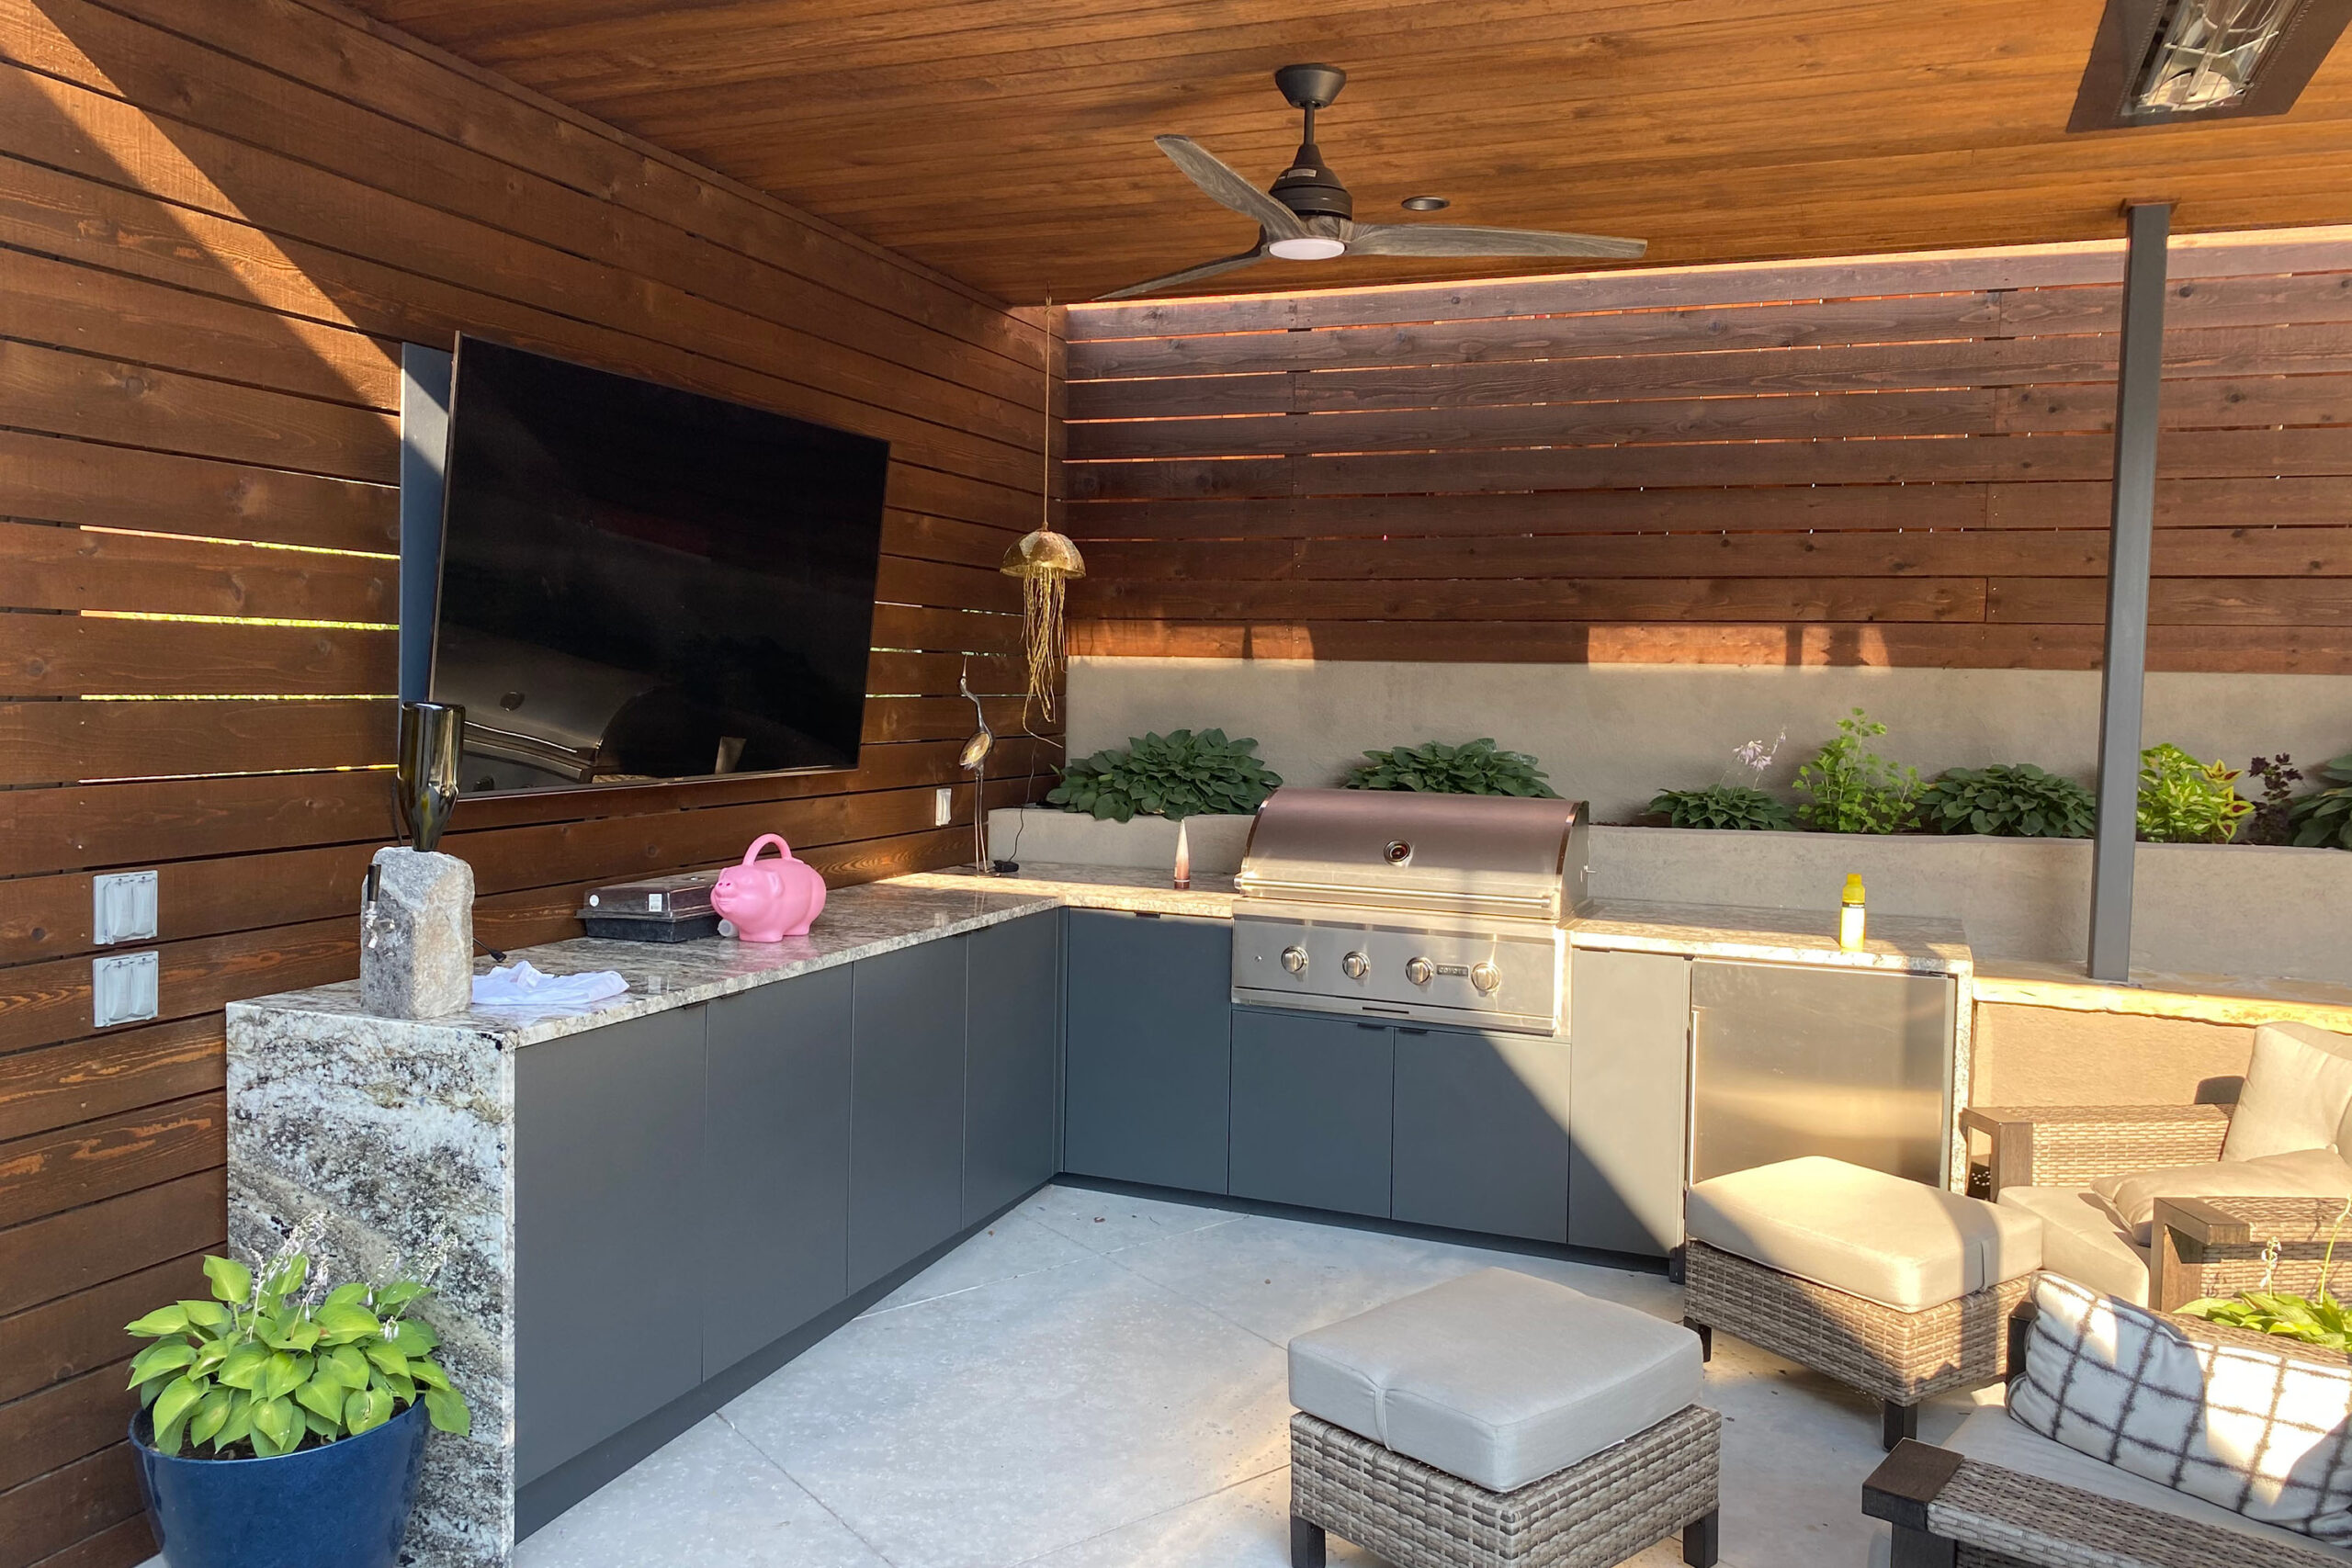 Counter Wrap Outdoor Cabinets Storage Gas Grill Seating Elite Cabinets Tulsa Outdoor Kitchen Cabinets